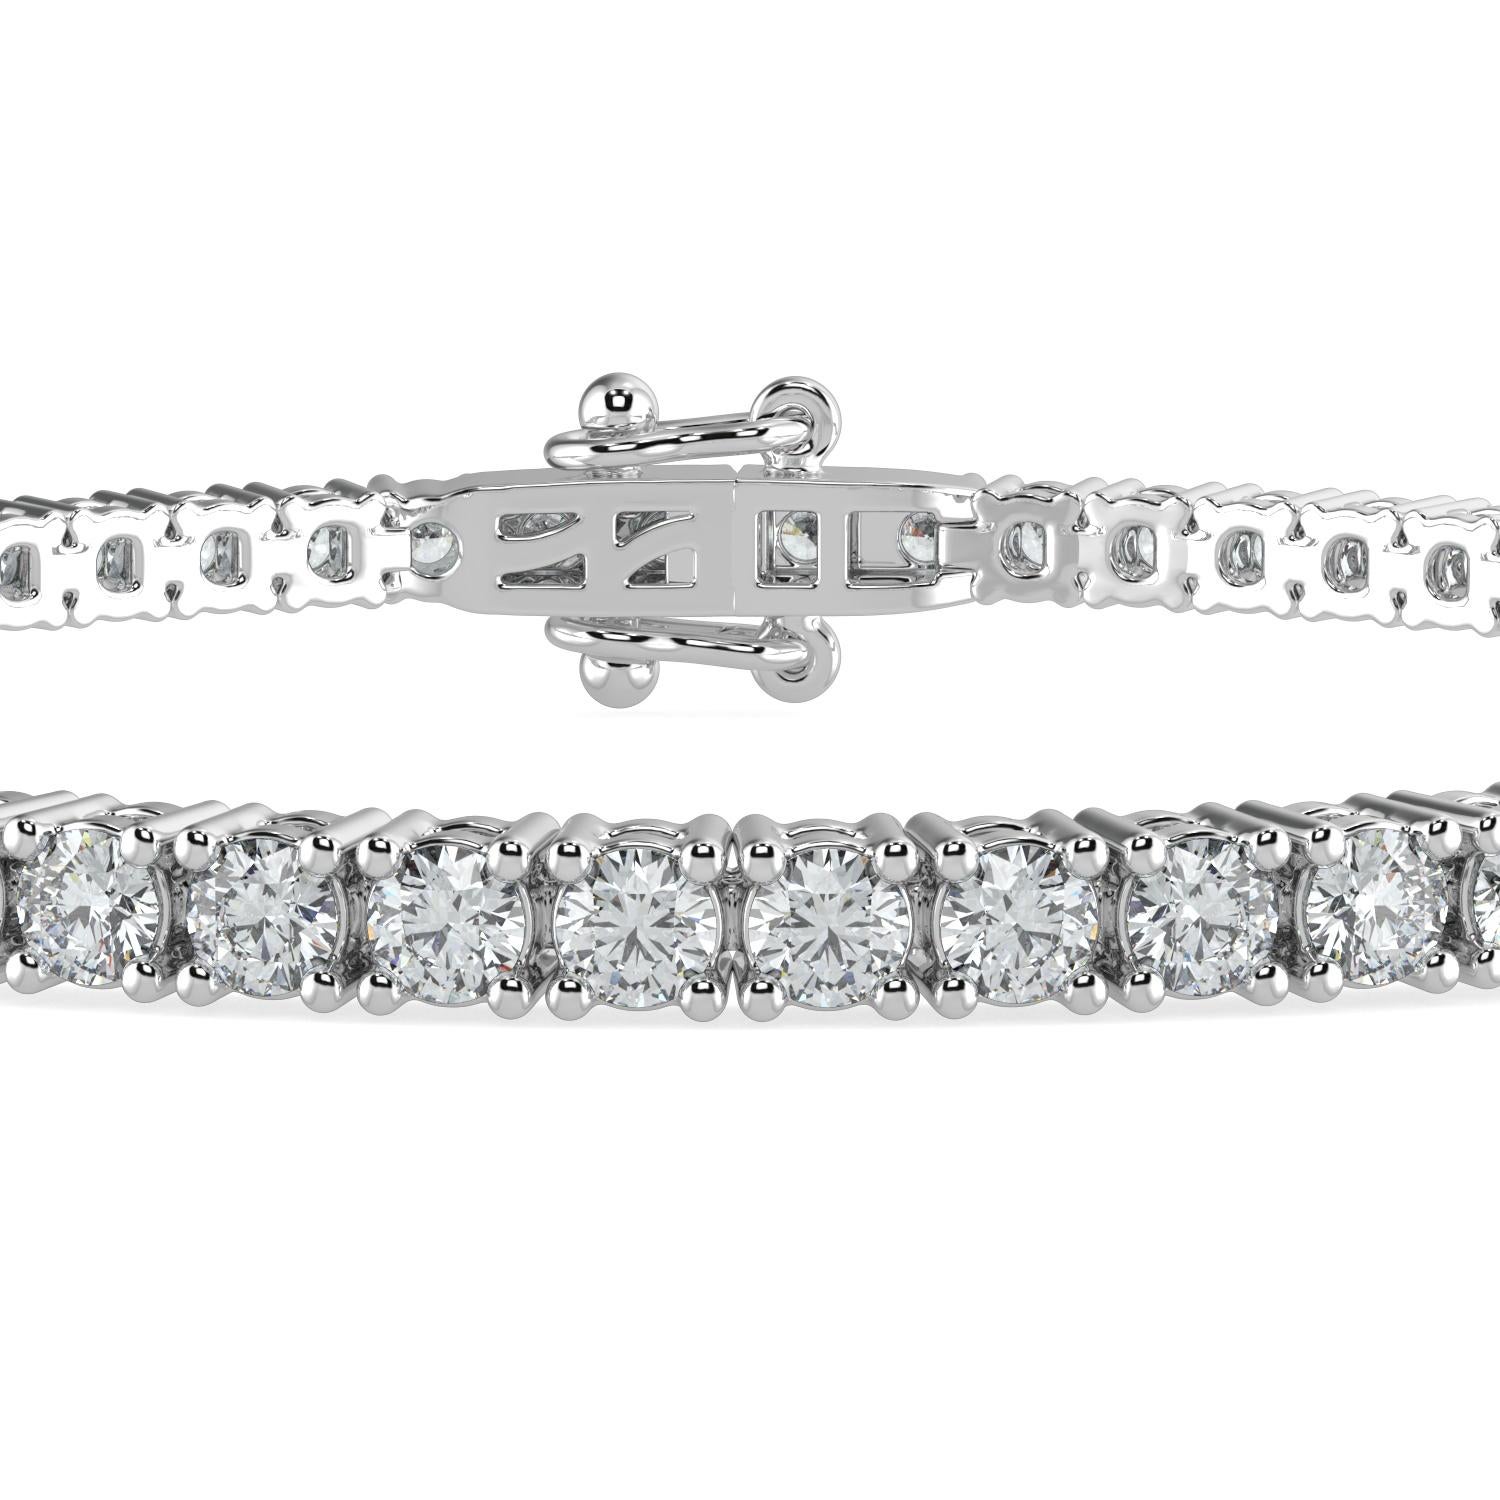 7.00 Carat Round Cut GH-I1 Natural Diamond Classic Tennis Bracelet 4 Prong 14K White Gold for Women

Specification
Brand: AAMIAA
Length: 7 Inches 
Color: GH
Carat Weight:7CTW
Clarity: I1

LUXURIOUS AND LASTING- Our bracelets are a luxurious and